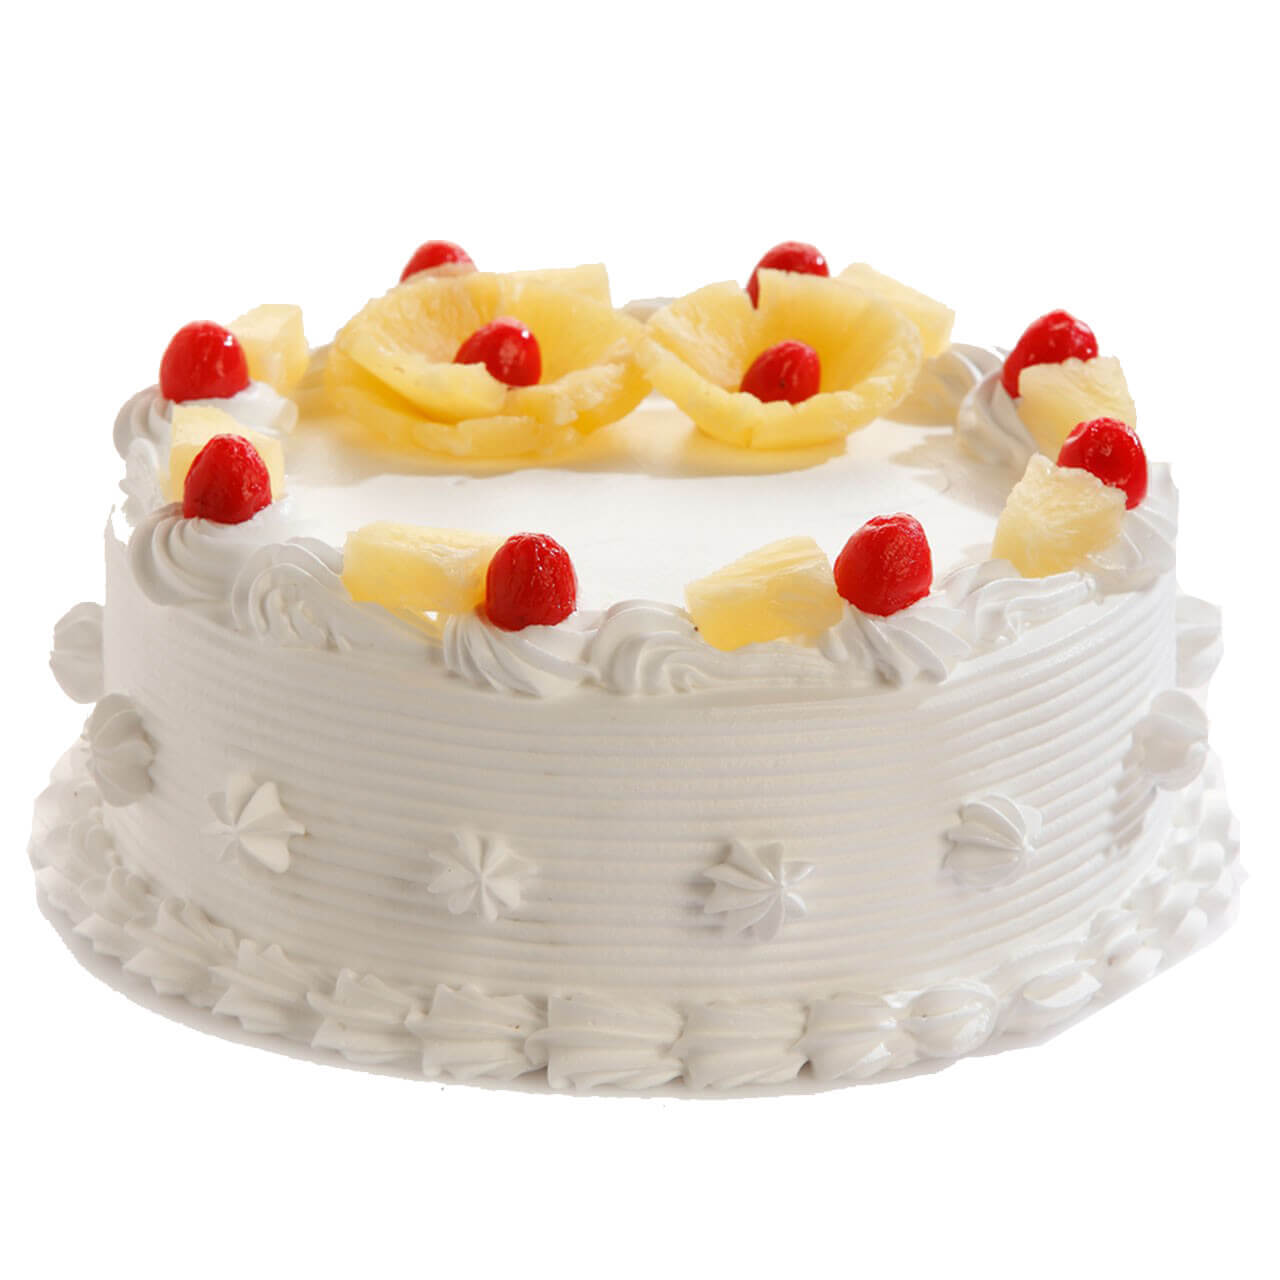 send 1Kg Pineapple Eggless Cake delivery